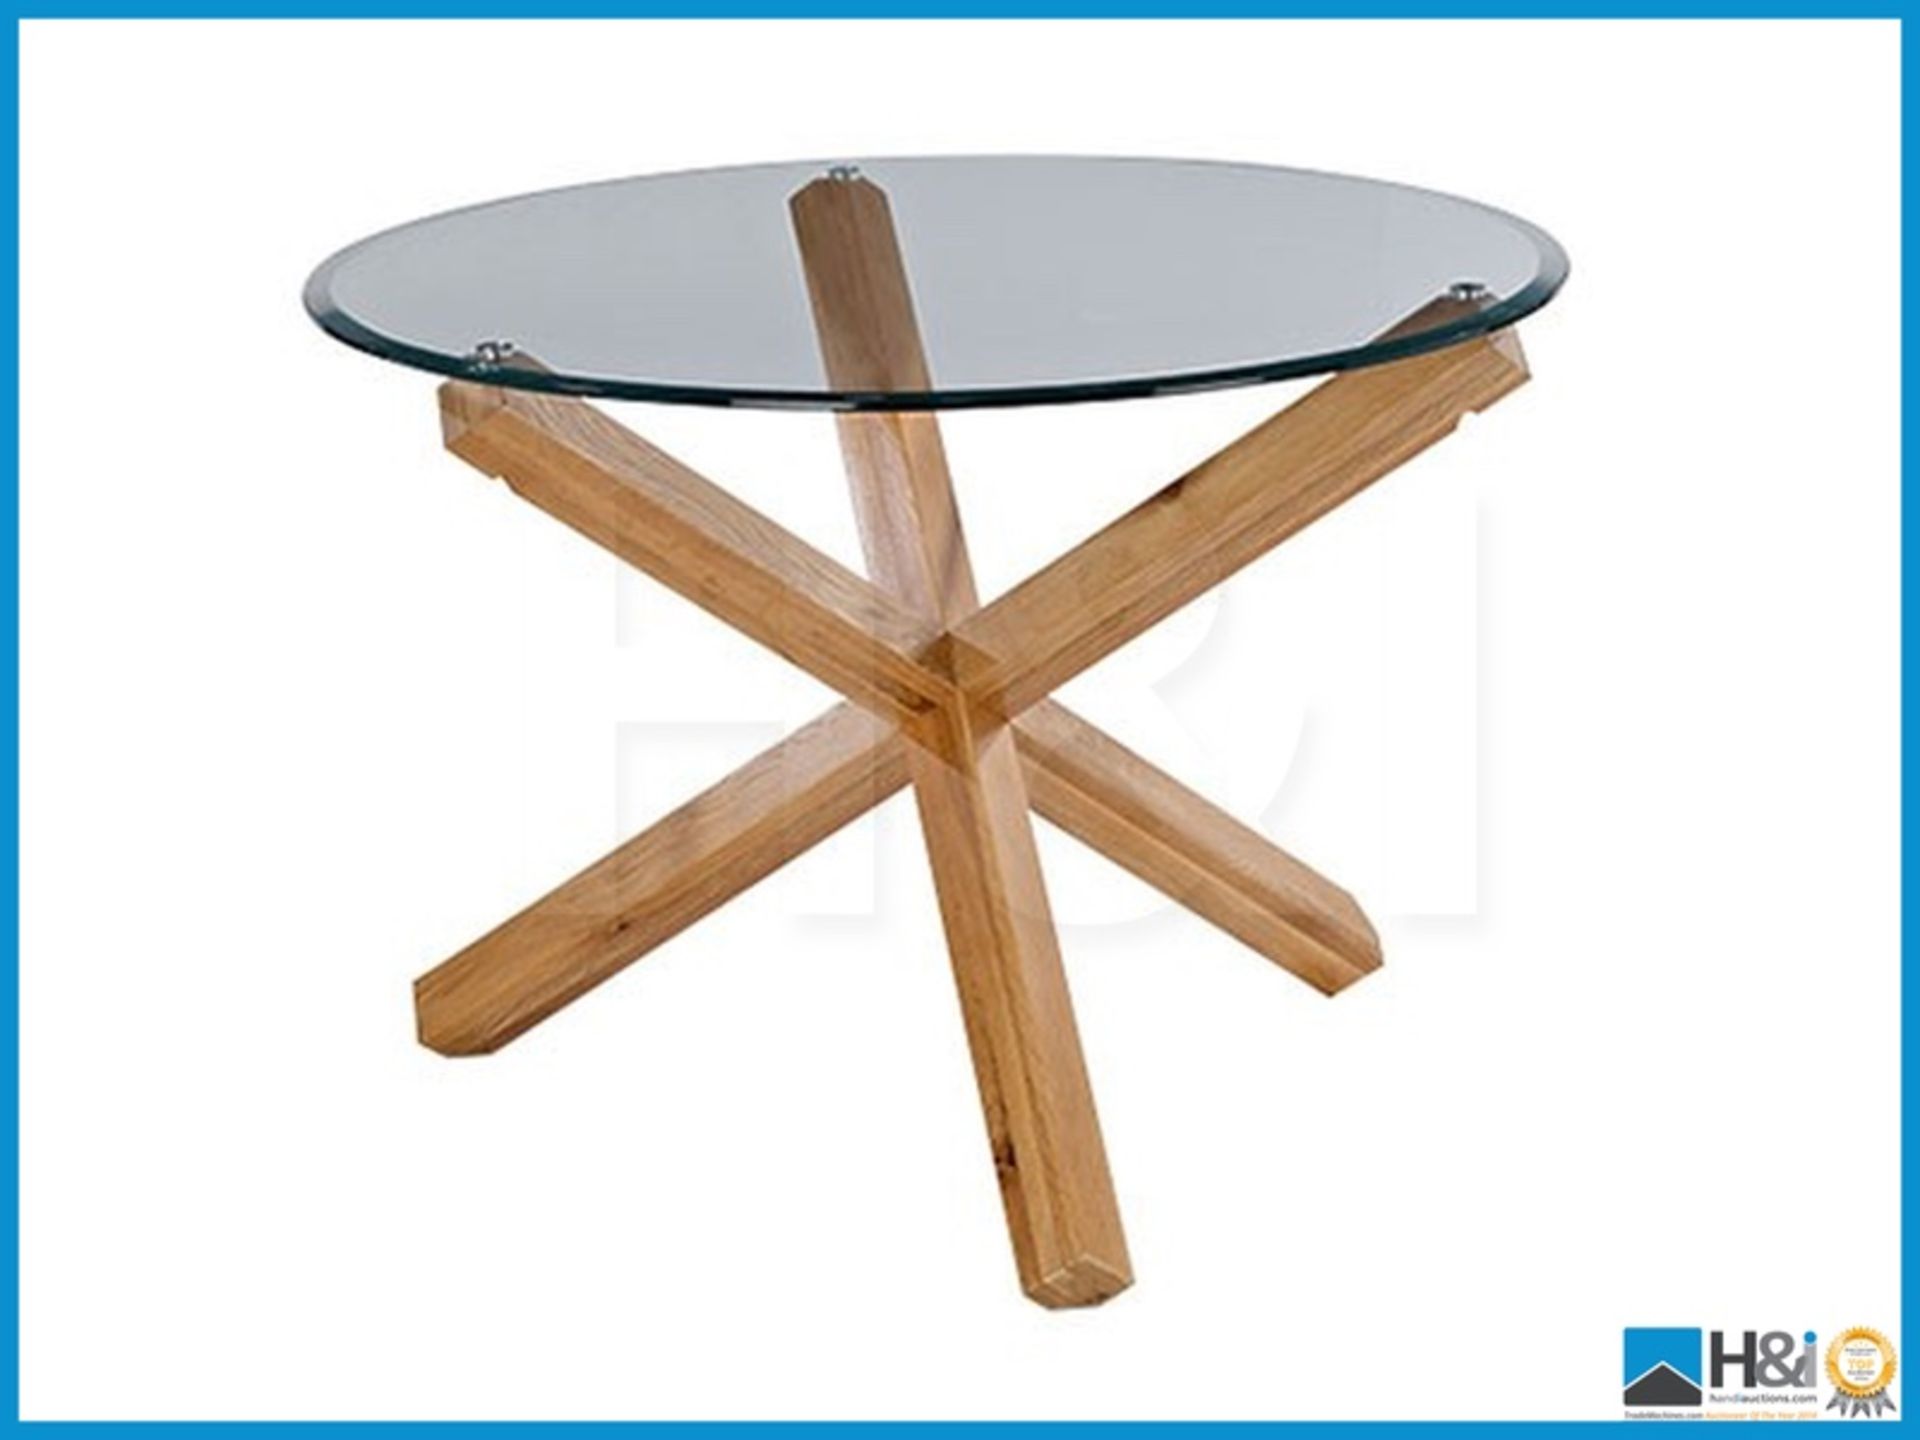 UNCHECKED CUSTOMER RETURNS OPORTO DINING TABLE WITH REAL OAK LEGS DIMENSIONS: 1064mm x H740mm